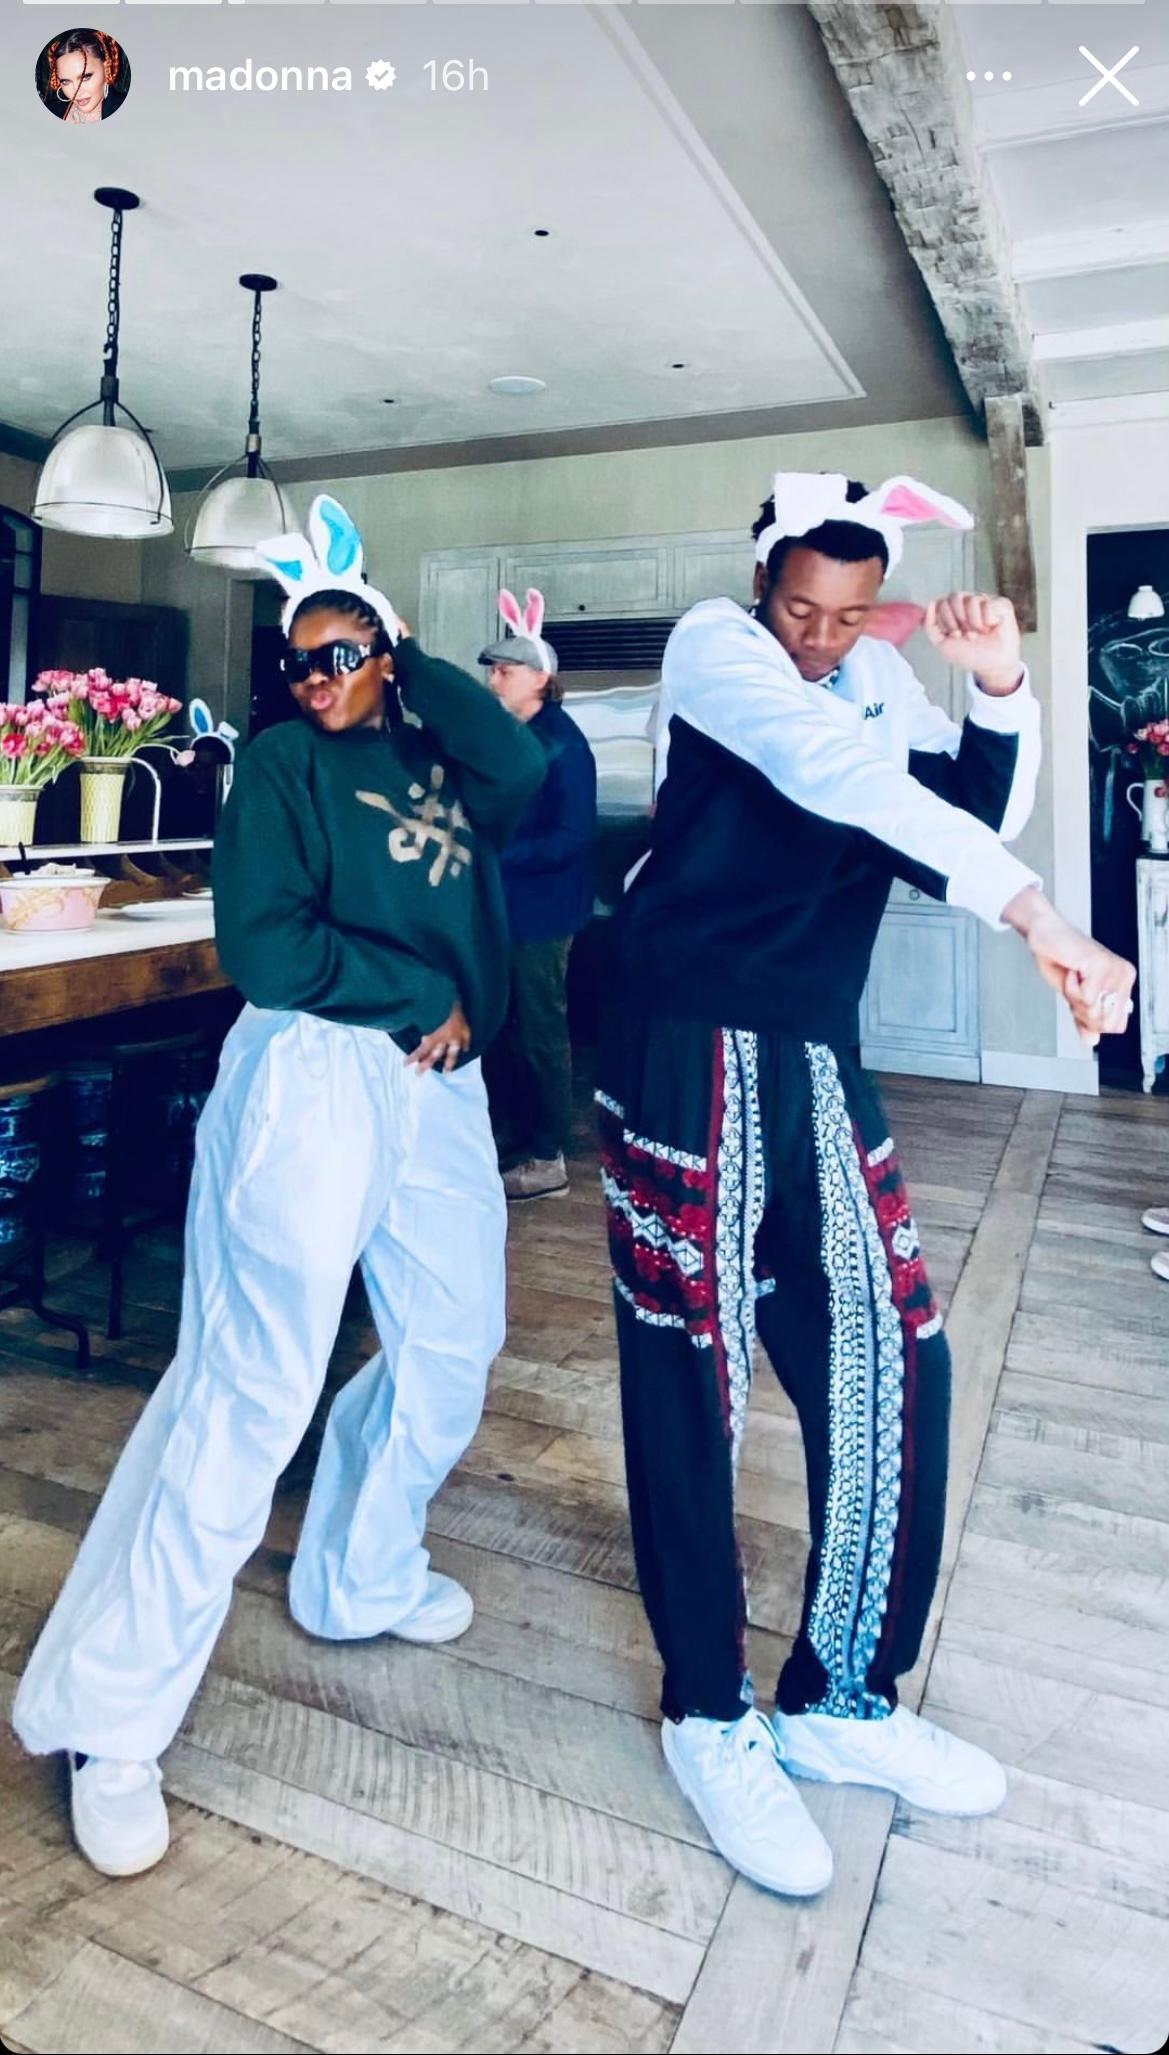 Madonna and her family celebrated Easter